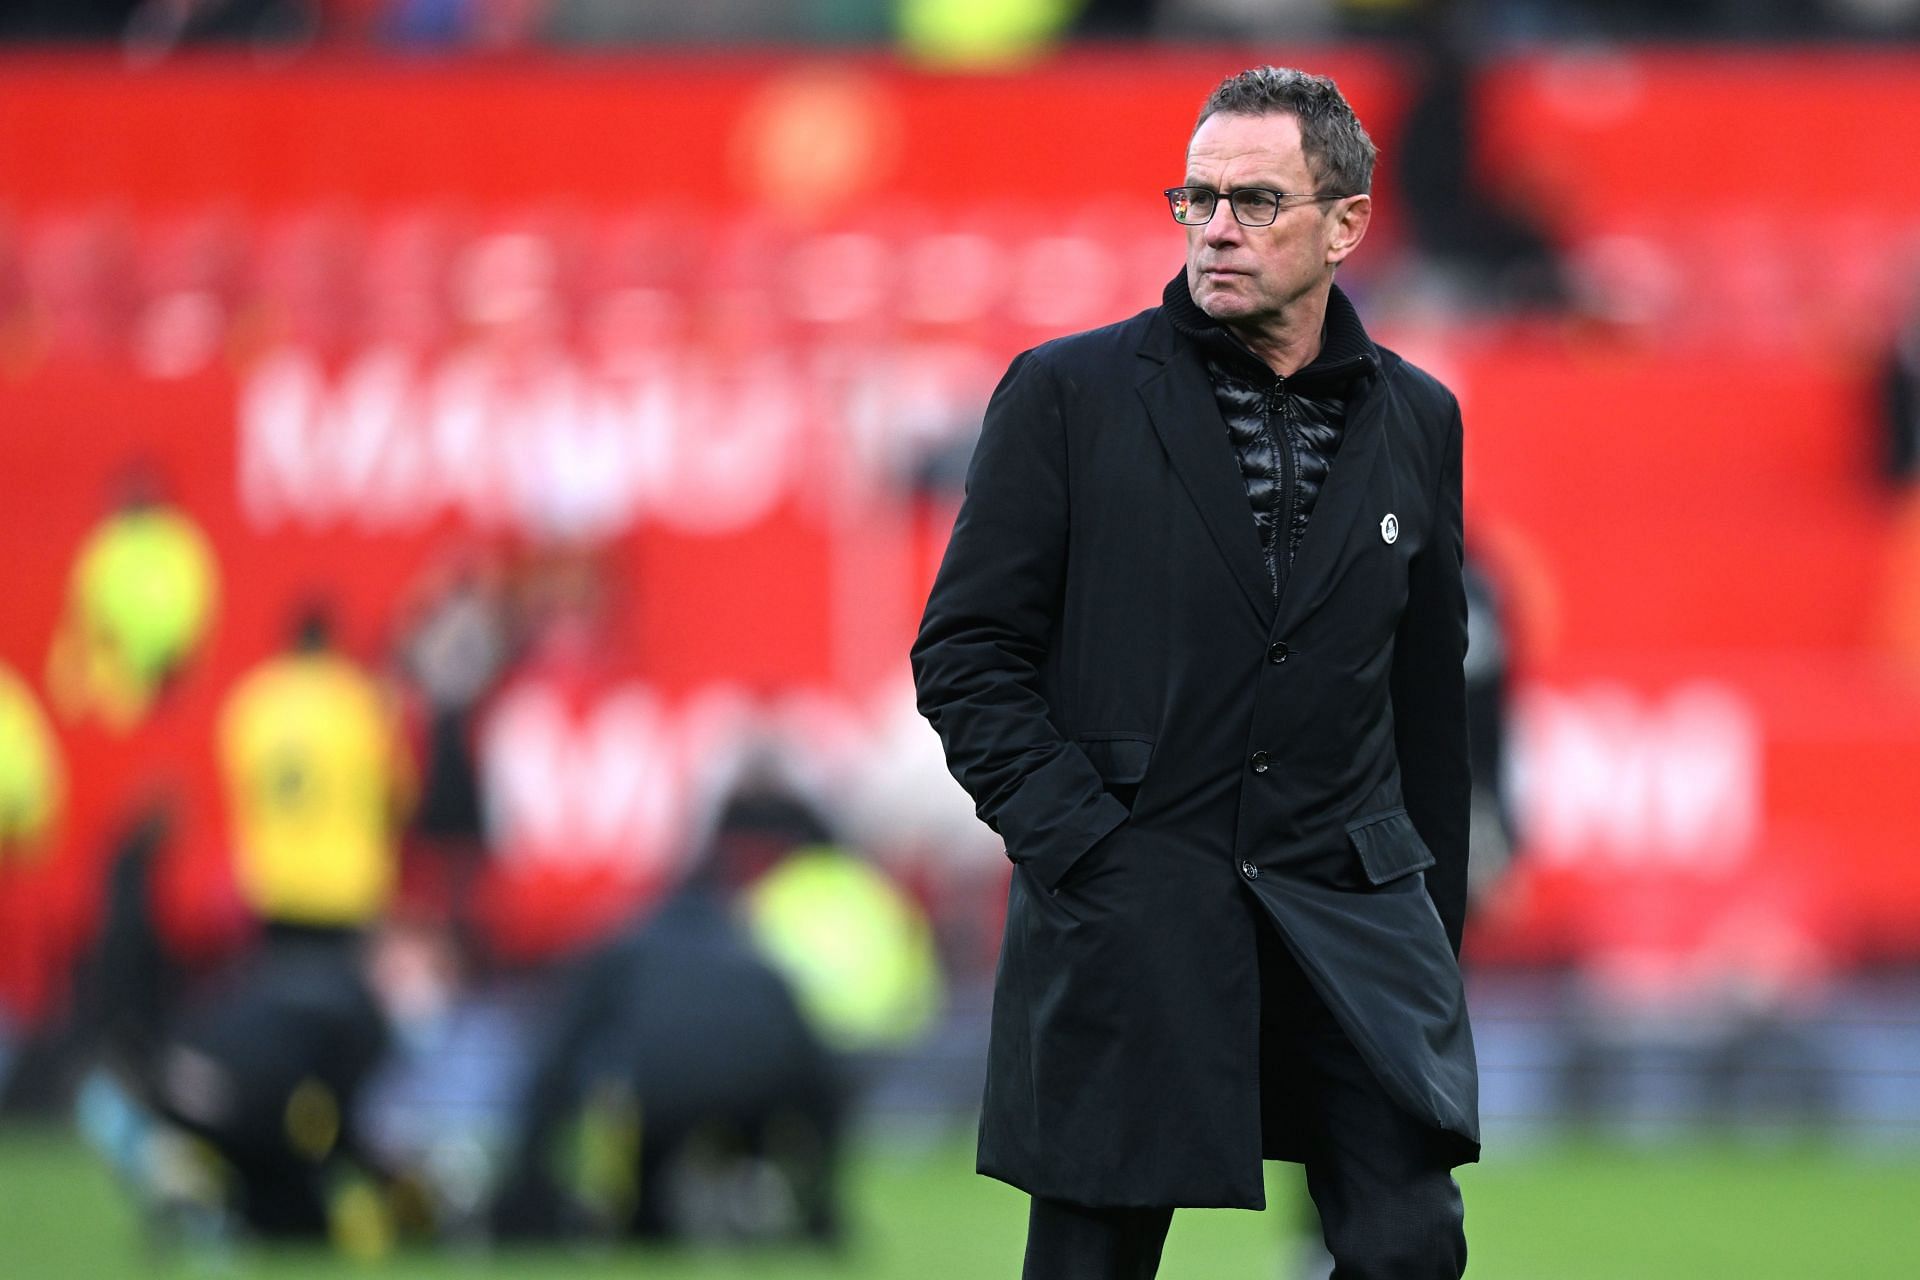 Ralf Rangnick is a man under pressure as Manchester United manager